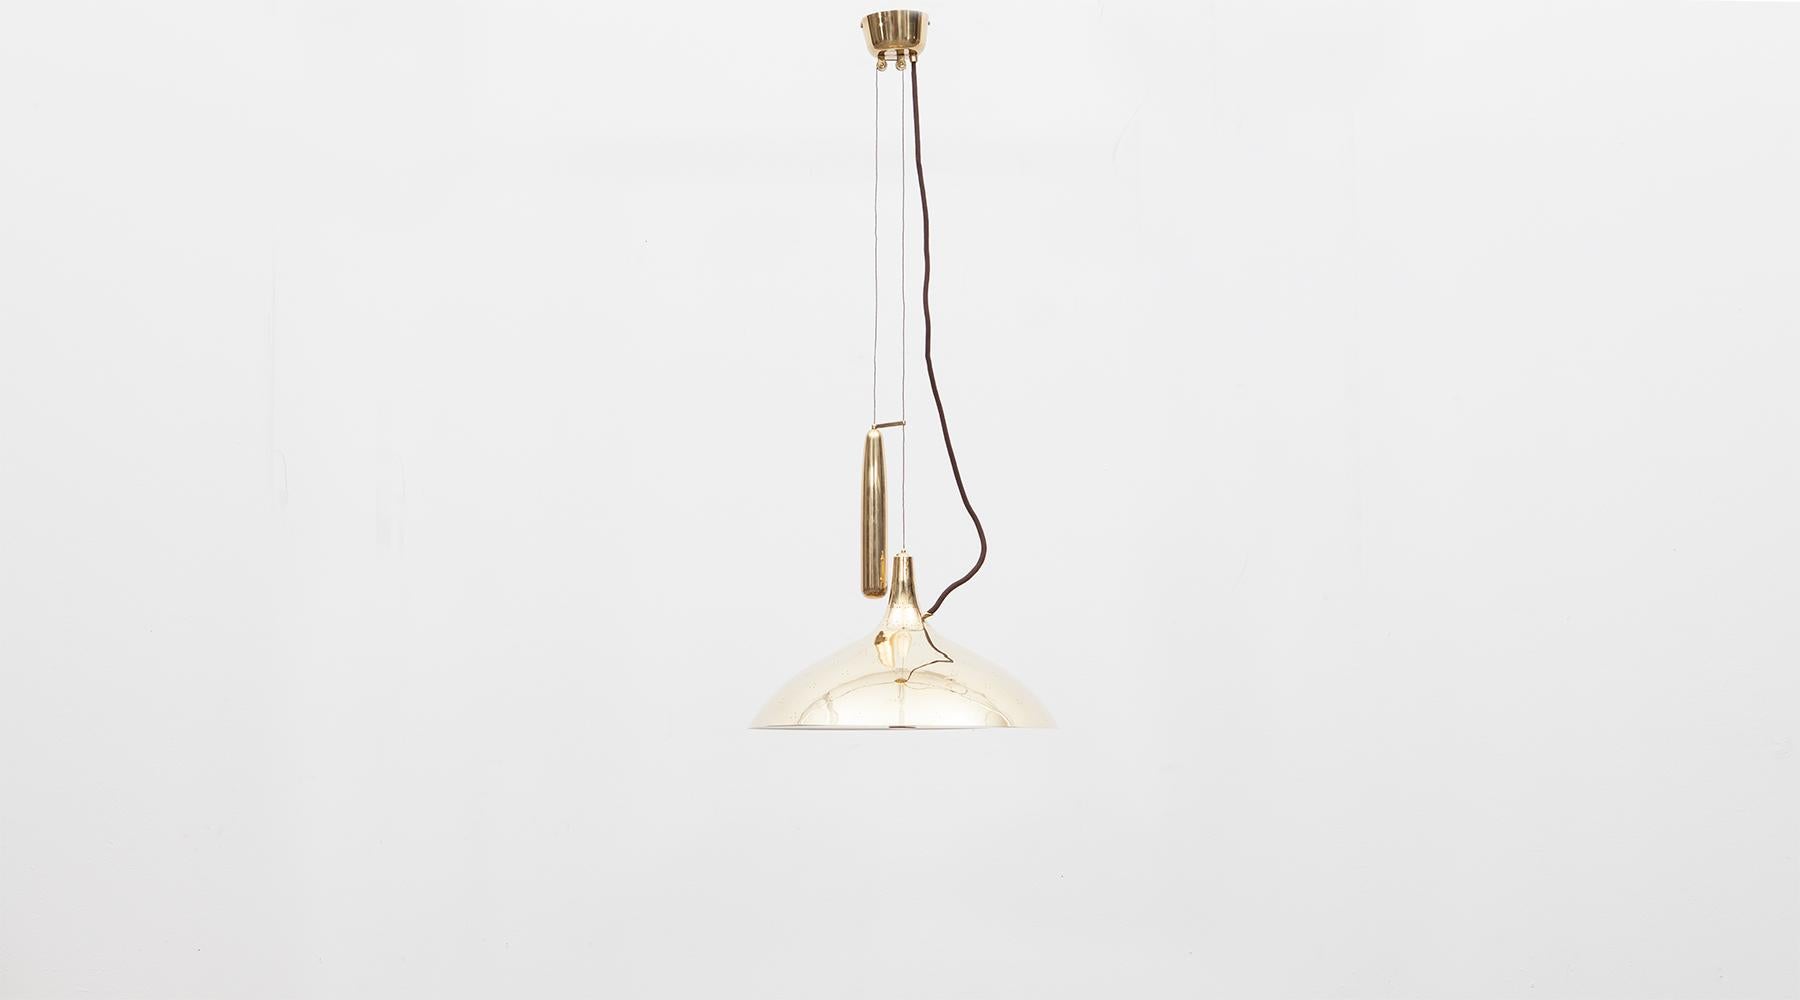 Brass and etched glass, ceiling lamp by Paavo Tynell, Finland, 1965.

Very elegant brass counterweight pendant designed by famous Finnish Paavo Tynell. Tapered with an etched glas cover, giving a warm charming light. A large brass weight allows to